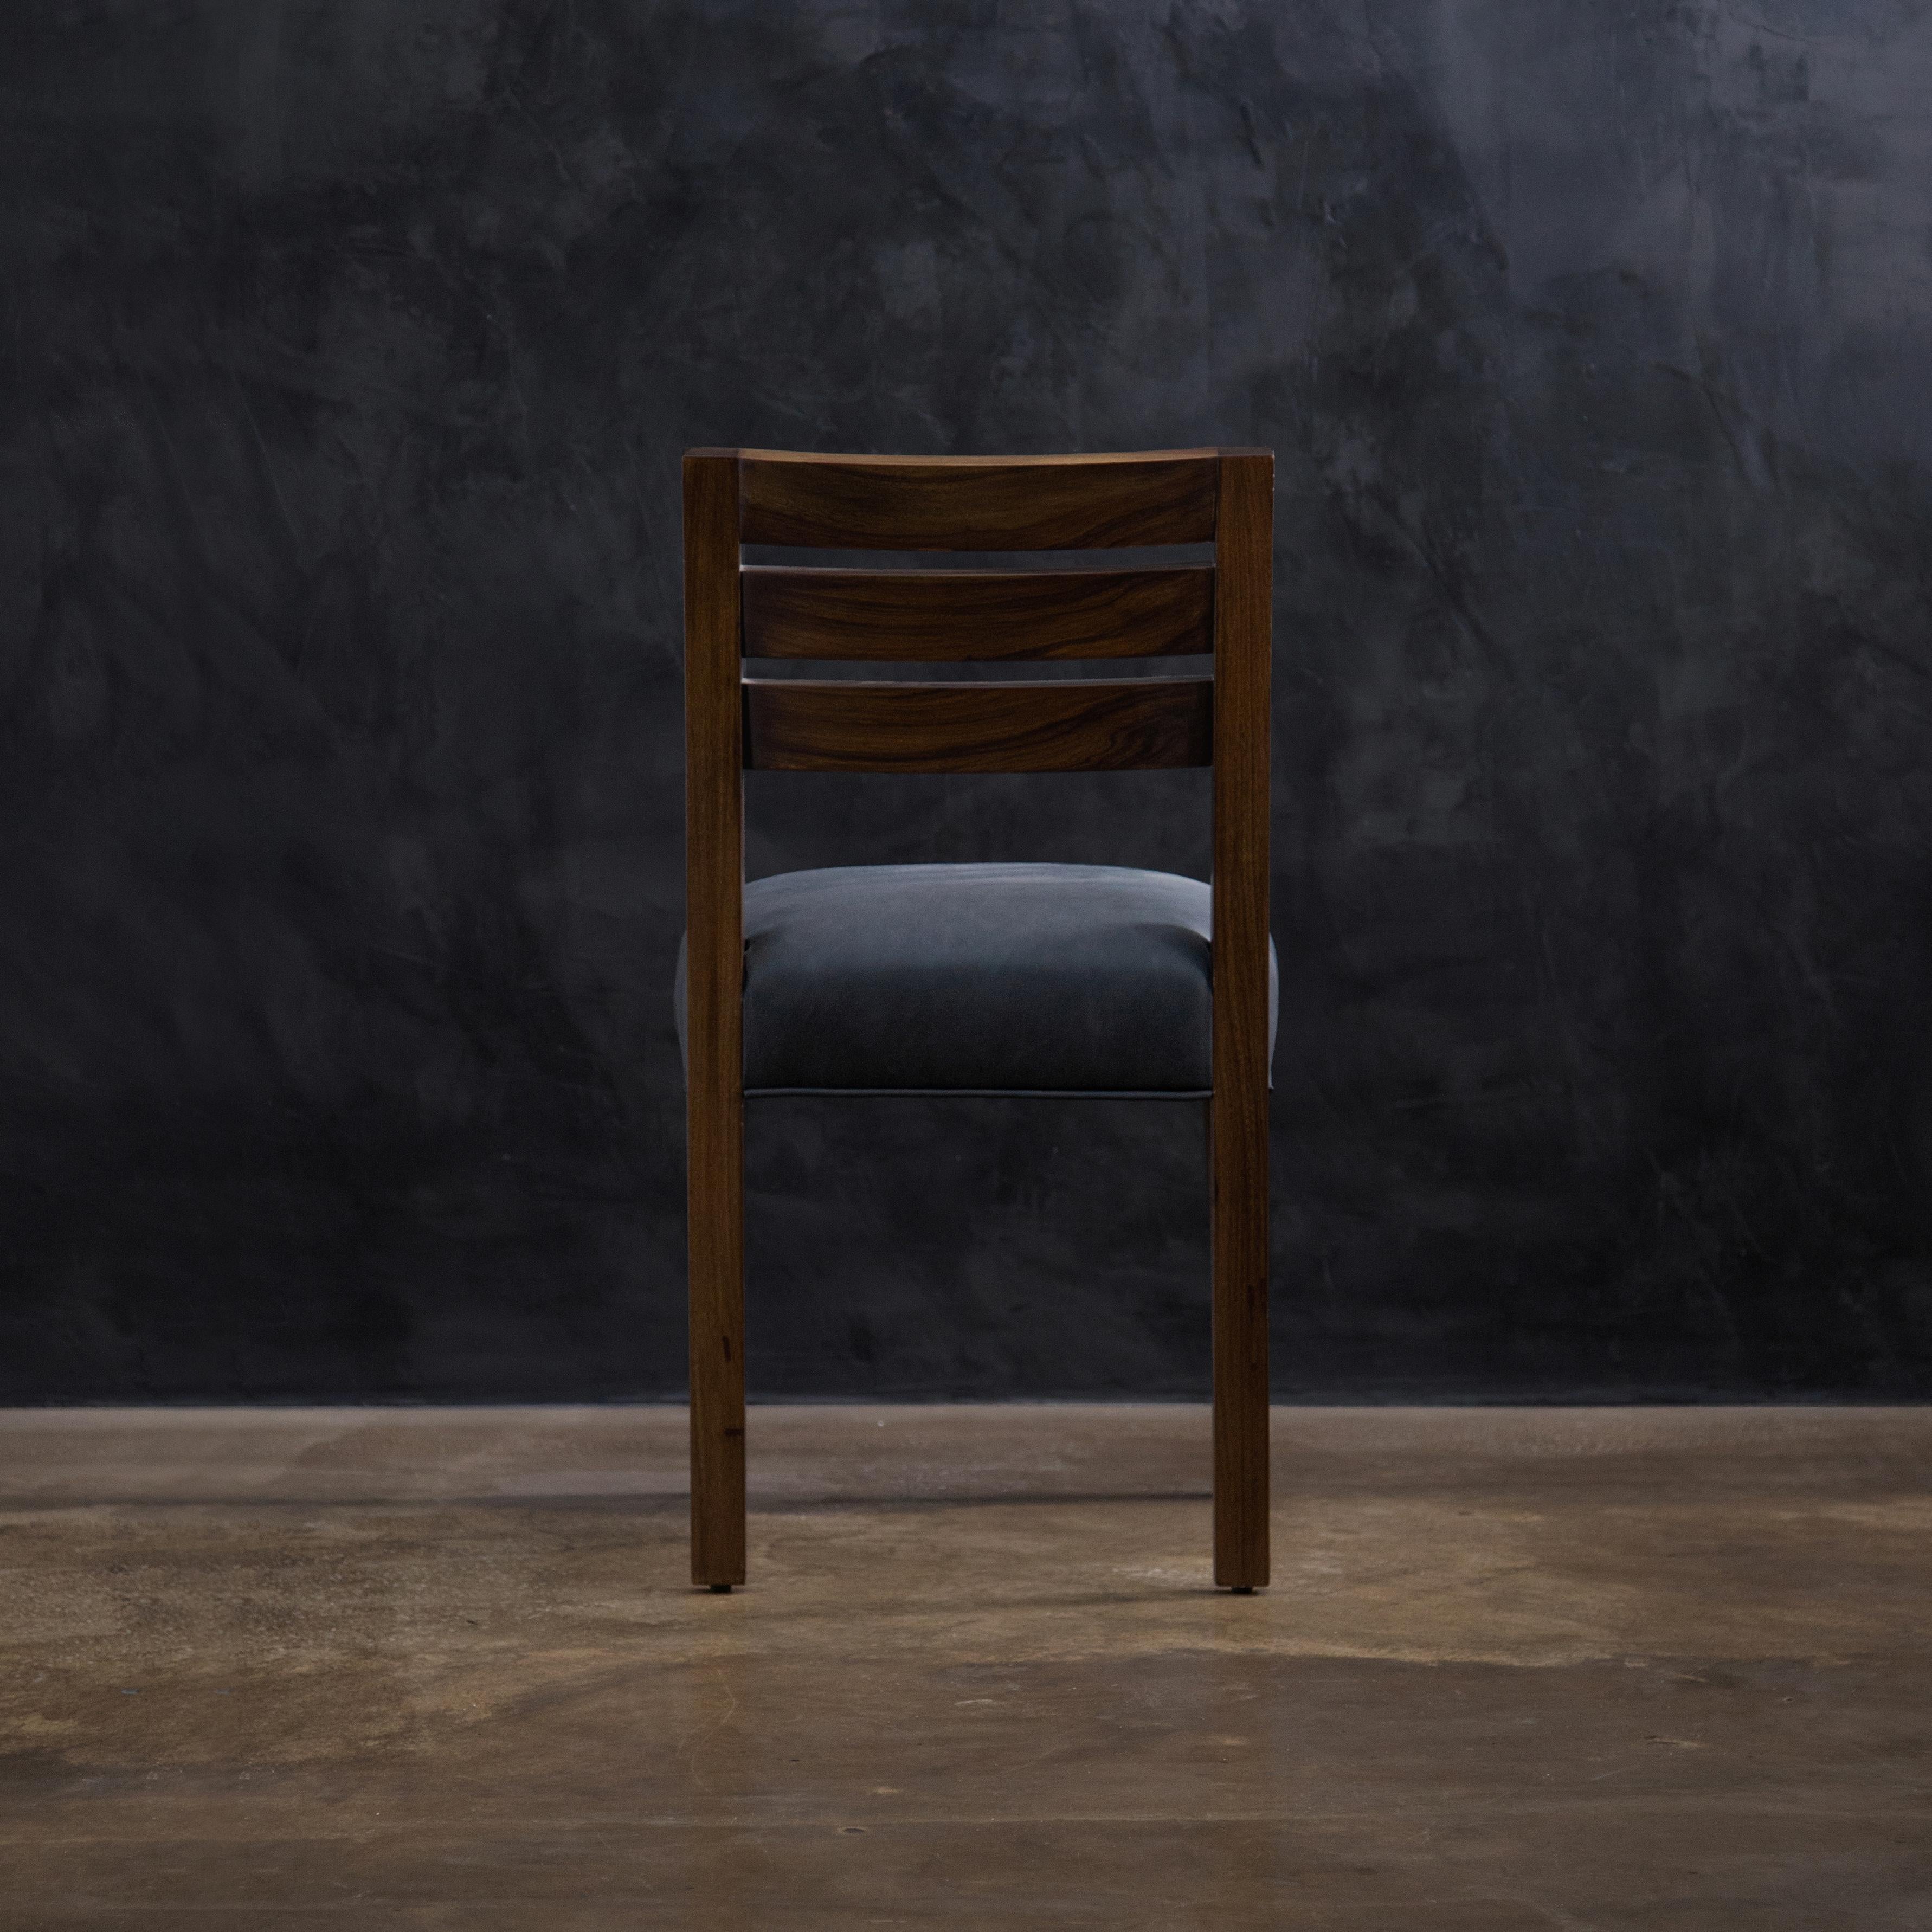 Contemporary Argentine Rosewood and Leather Side Chair von Costantini, Renzo im Zustand „Neu“ im Angebot in New York, NY